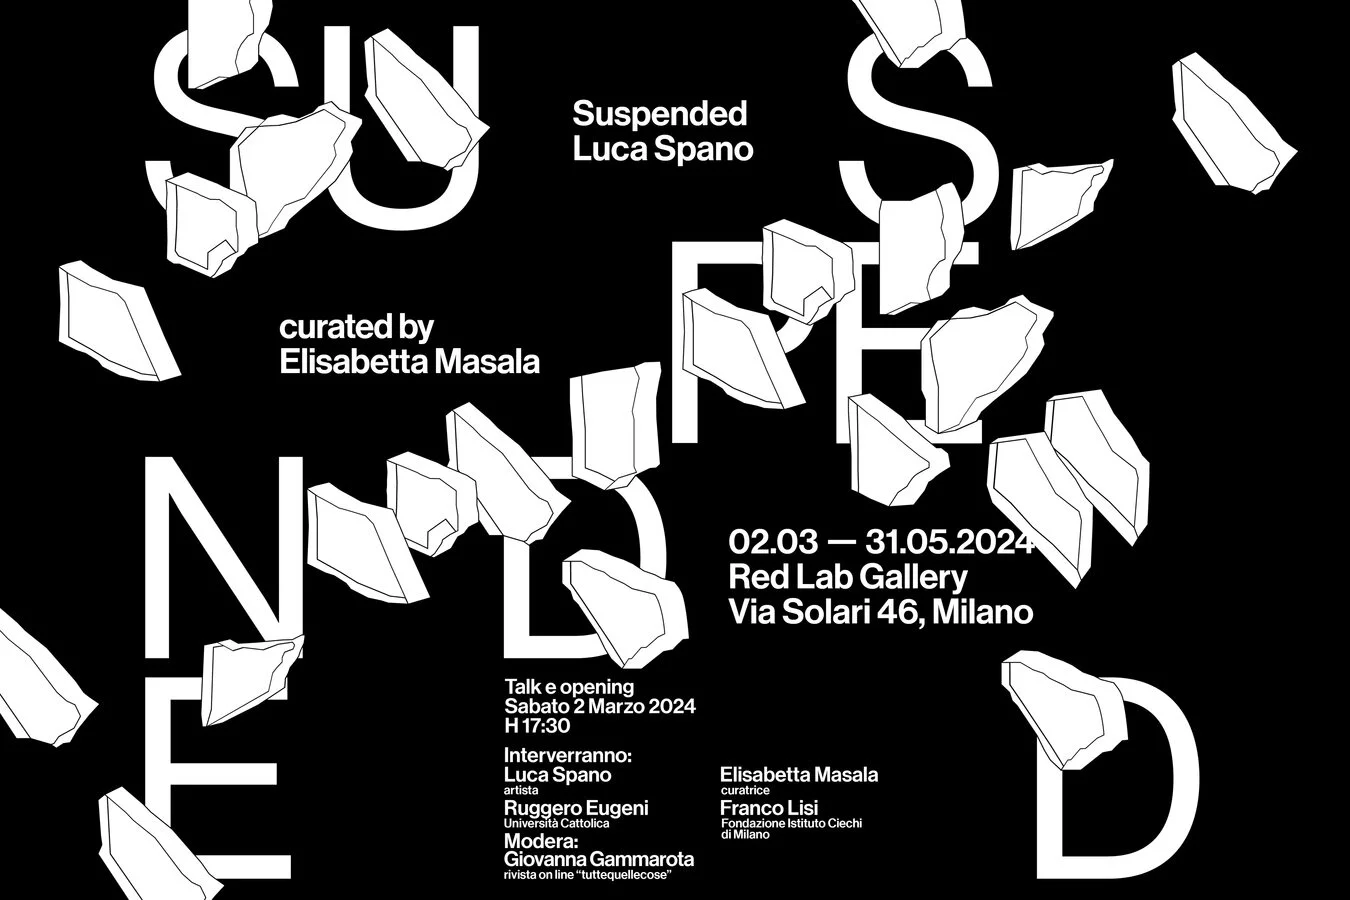 Luca Spano. Suspended